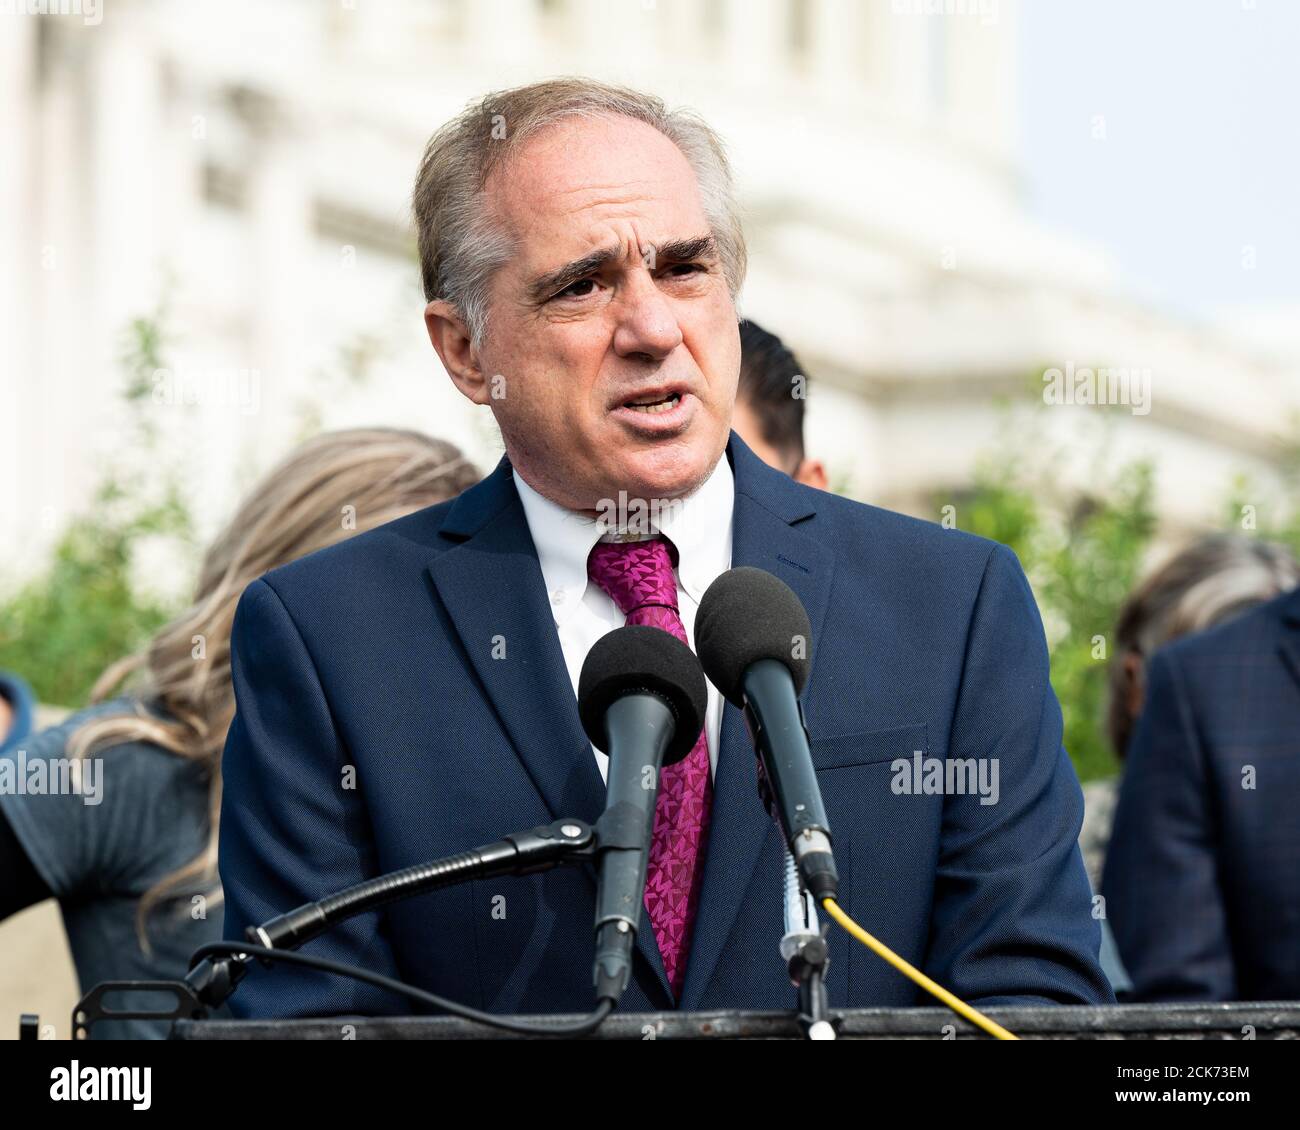 Washington, United States. 15th Sep, 2020. David Shulkin, Former United States Secretary of Veterans Affairs, at the U.S. Capitol advocating for legislation to assist veterans exposed to burn pits. Credit: SOPA Images Limited/Alamy Live News Stock Photo